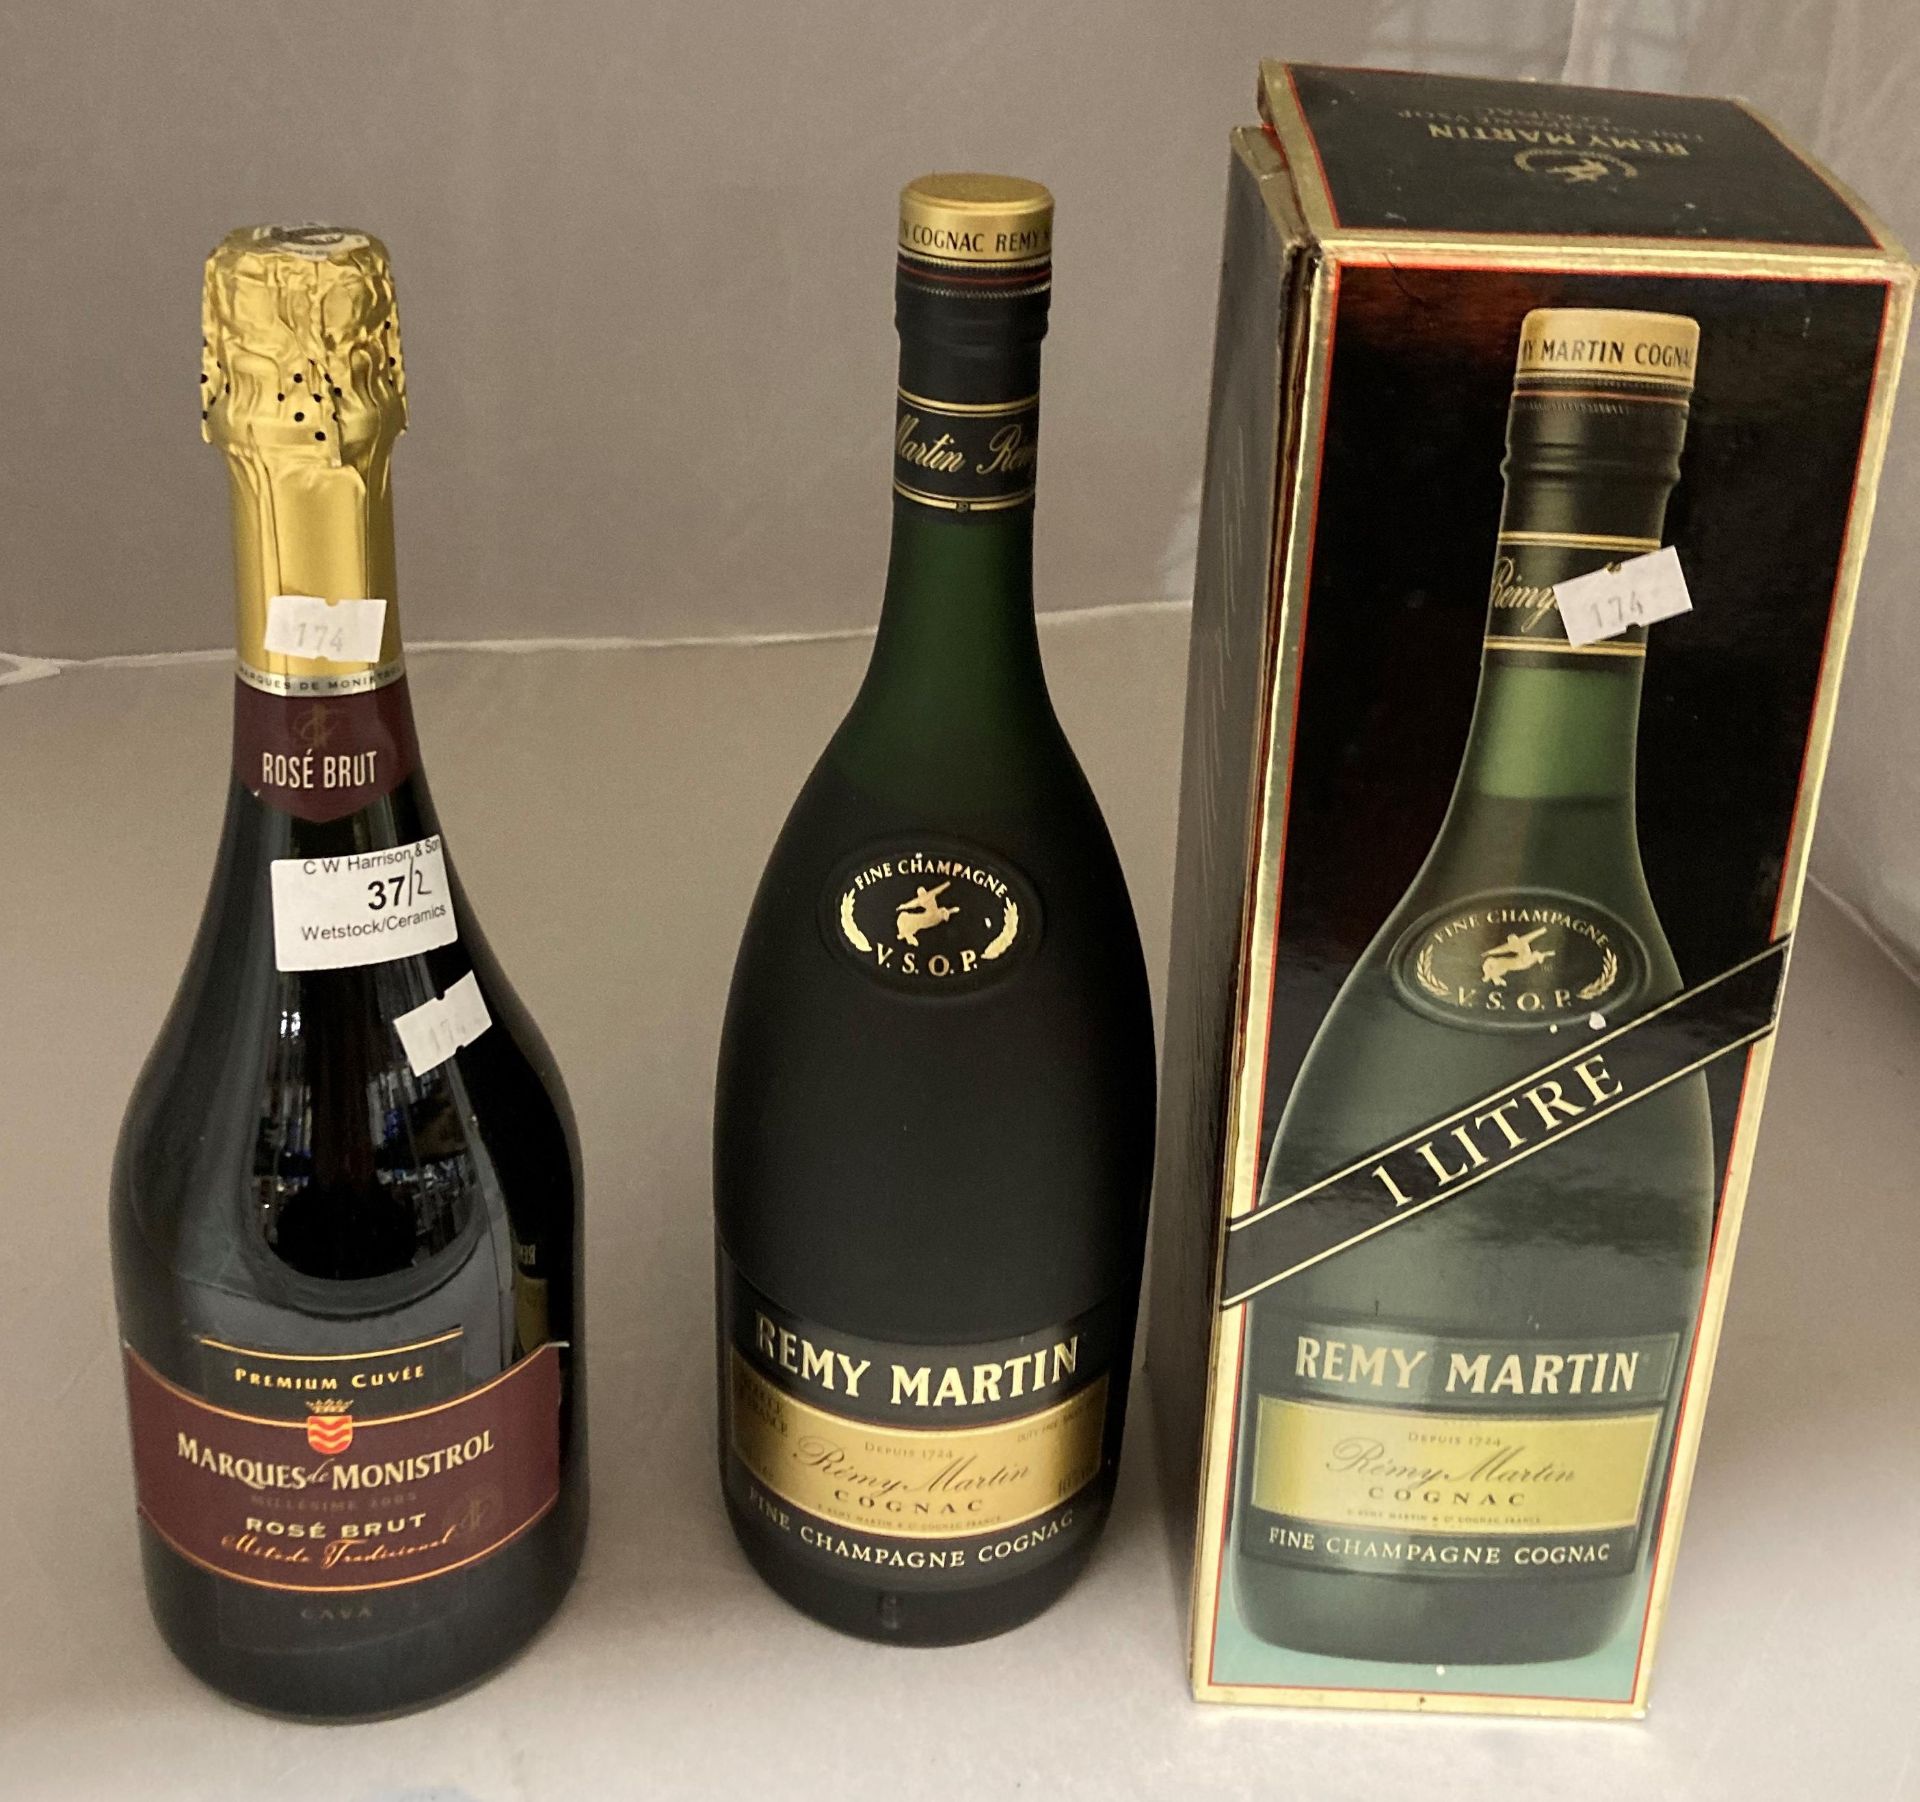 A 100cl bottle of Remy Martin Fine Champagne Cognac in presentation box and a 750ml Marques de